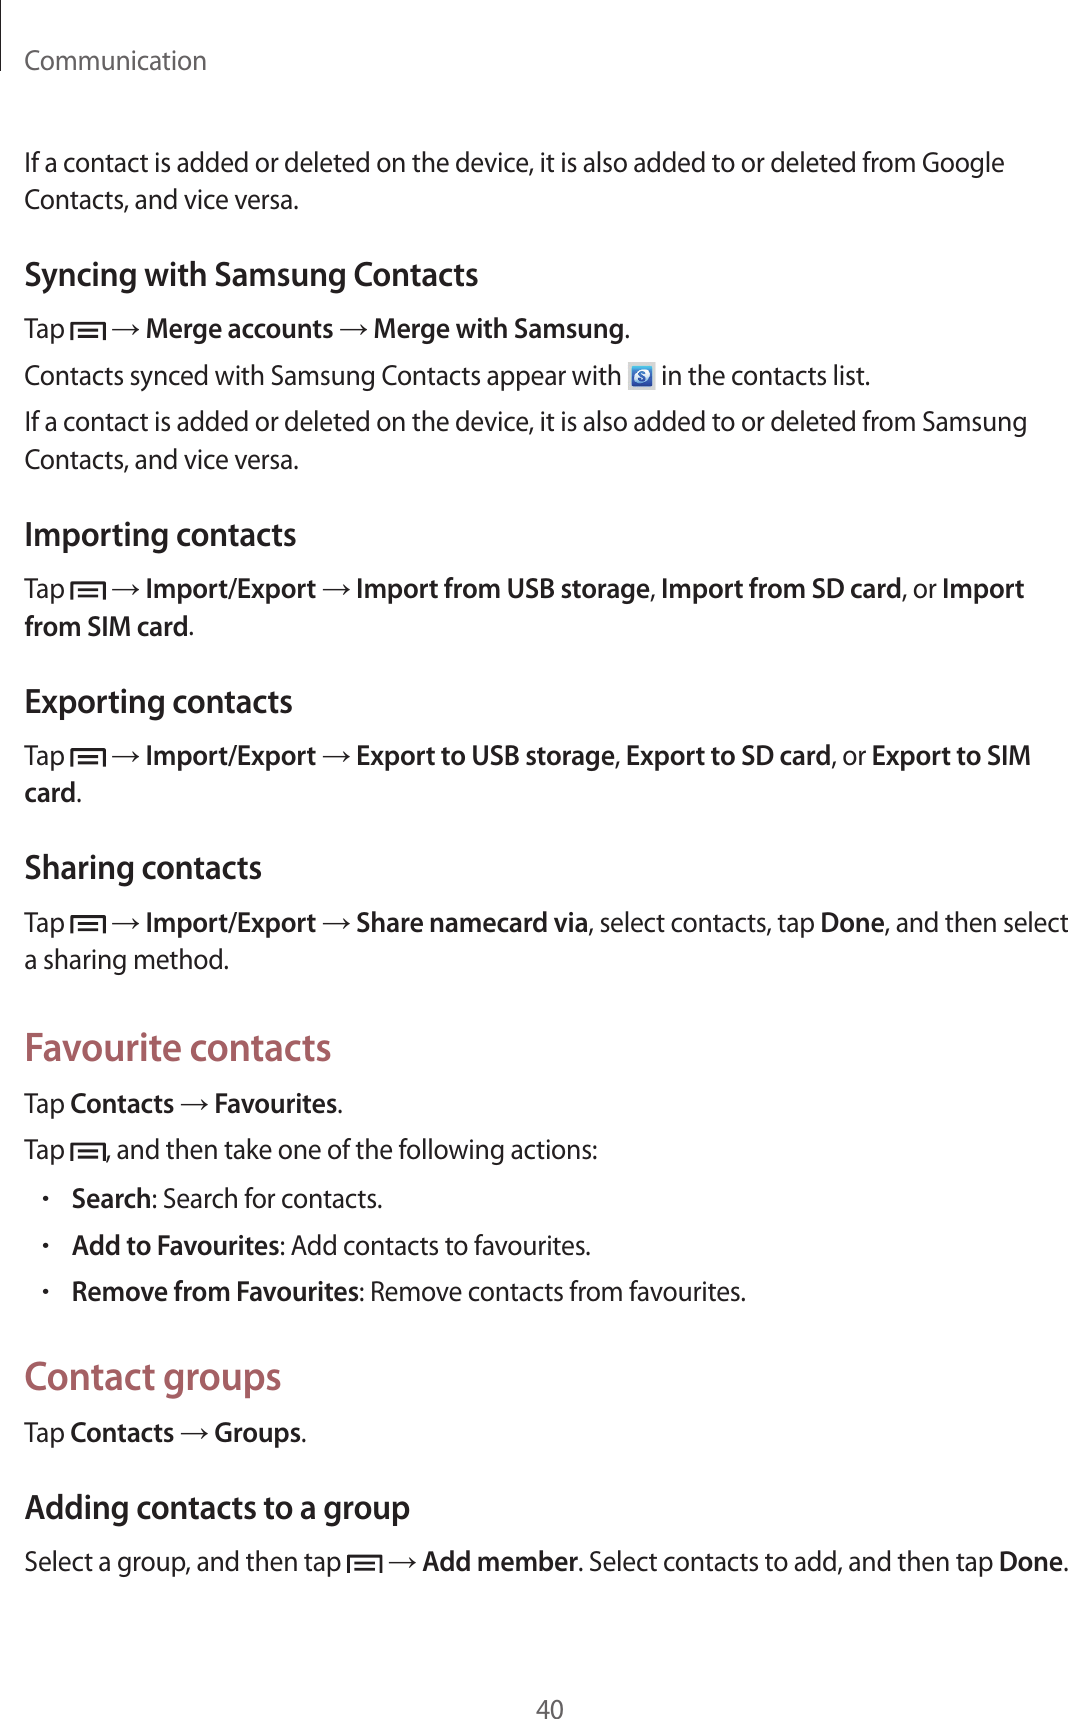 Communication40If a contact is added or deleted on the device, it is also added to or deleted from Google Contacts, and vice versa.Syncing with Samsung ContactsTap   → Merge accounts → Merge with Samsung.Contacts synced with Samsung Contacts appear with   in the contacts list.If a contact is added or deleted on the device, it is also added to or deleted from Samsung Contacts, and vice versa.Importing contactsTap   → Import/Export → Import from USB storage, Import from SD card, or Import from SIM card.Exporting contactsTap   → Import/Export → Export to USB storage, Export to SD card, or Export to SIM card.Sharing contactsTap   → Import/Export → Share namecard via, select contacts, tap Done, and then select a sharing method.Favourite contactsTap Contacts → Favourites.Tap  , and then take one of the following actions:• Search: Search for contacts.• Add to Favourites: Add contacts to favourites.• Remove from Favourites: Remove contacts from favourites.Contact groupsTap Contacts → Groups.Adding contacts to a groupSelect a group, and then tap   → Add member. Select contacts to add, and then tap Done.